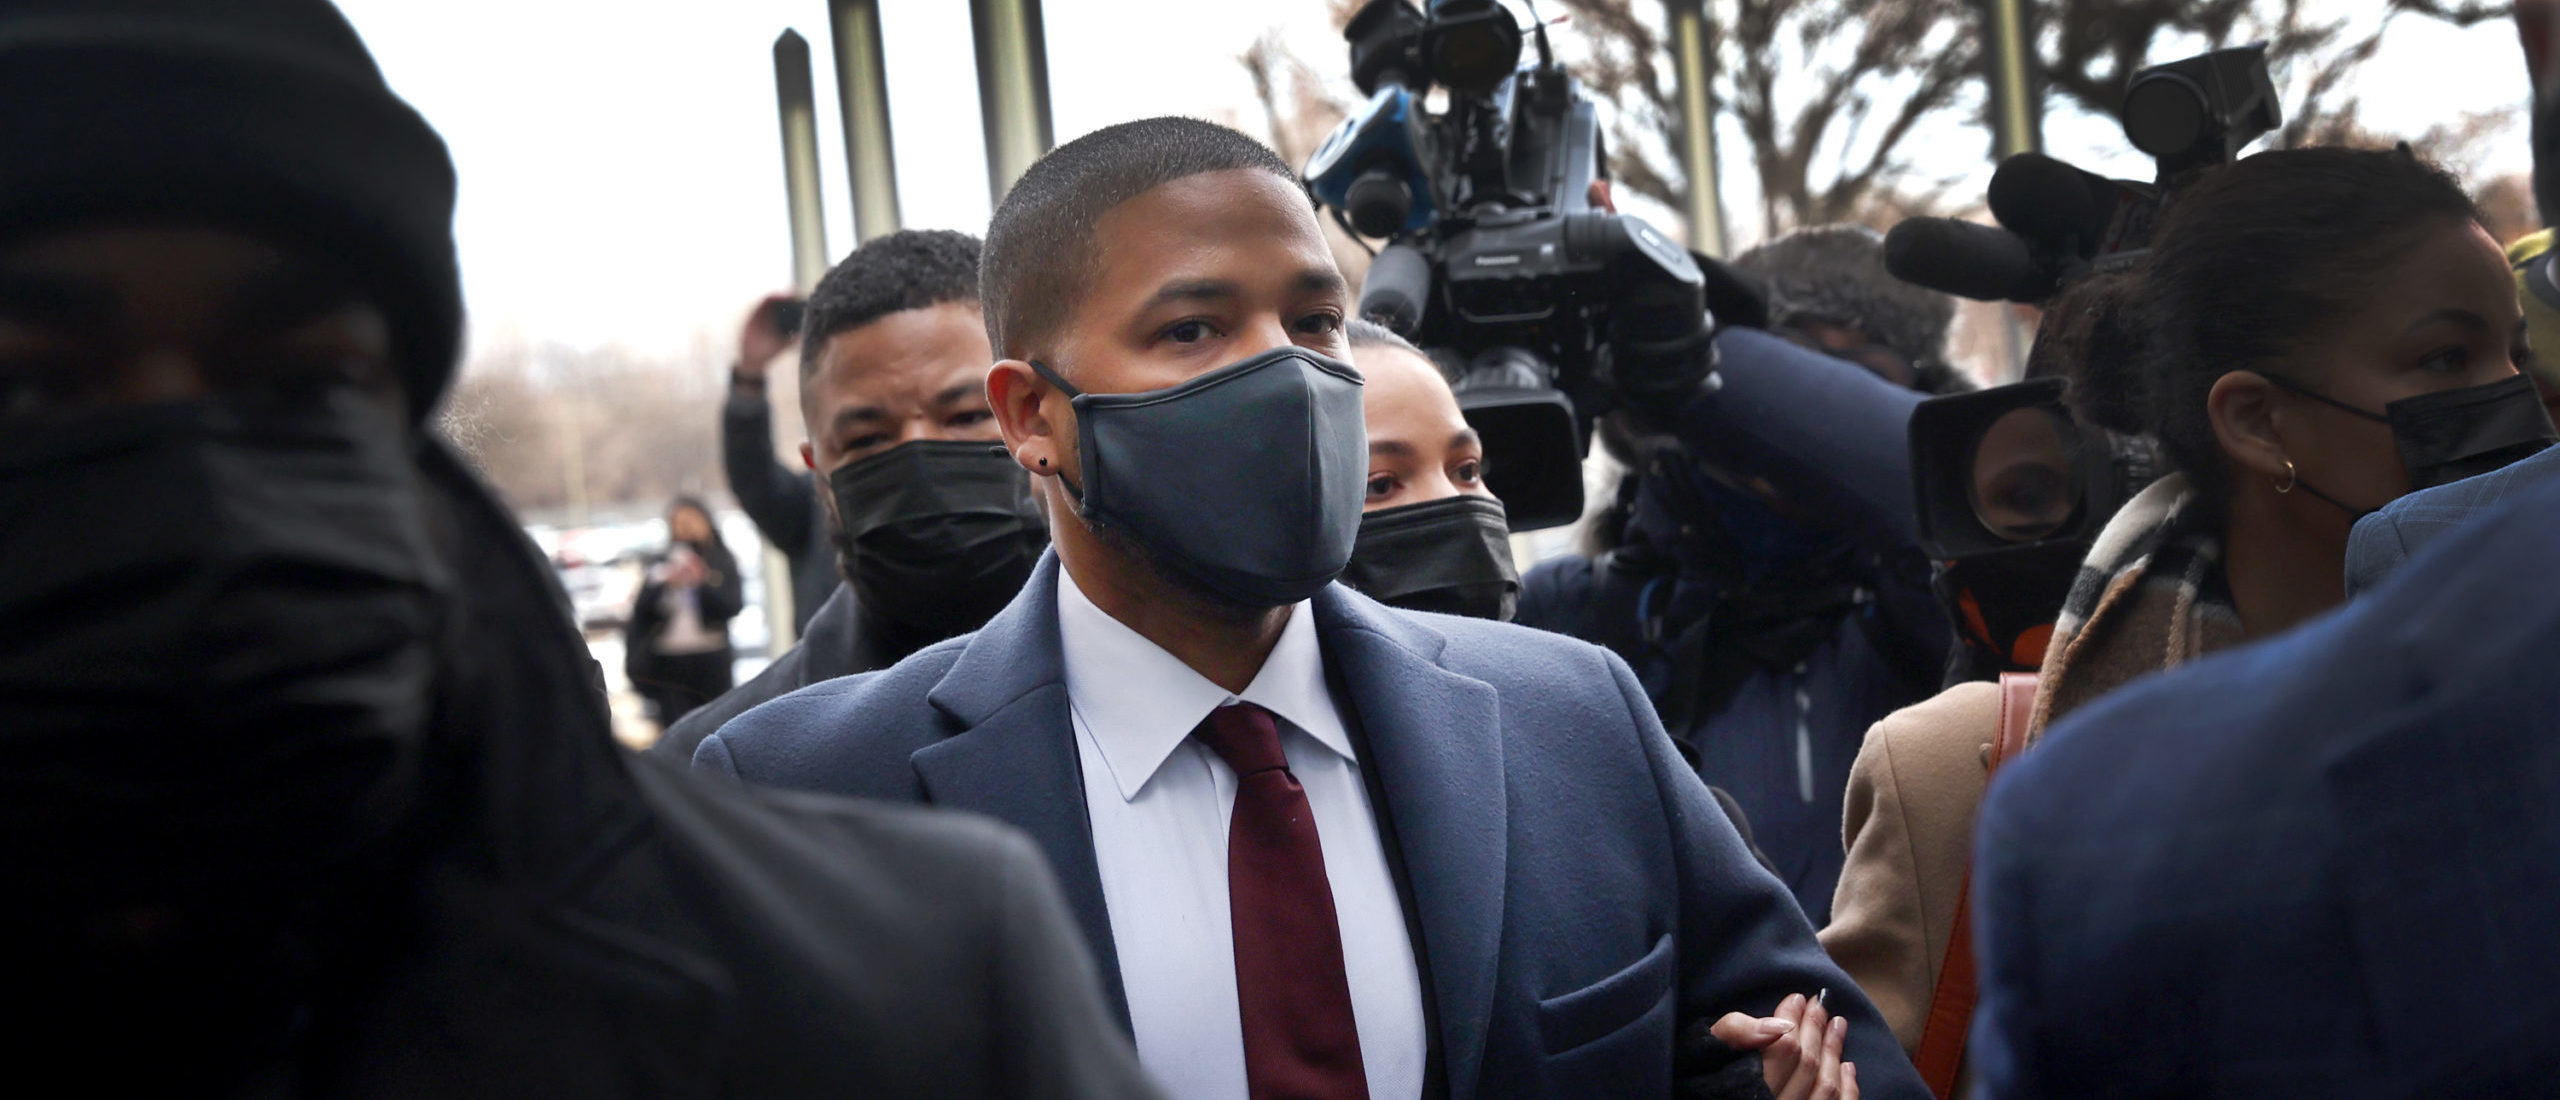 CHICAGO, ILLINOIS - MARCH 10: Former "Empire" actor Jussie Smollett arrives at the Leighton Criminal Courts Building for his sentencing hearing on March 10, 2022 in Chicago, Illinois. Smollett was found guilty last year of lying to police about a hate crime after he reported that two masked men physically attacked him, yelling racist and anti-gay remarks near his Chicago home in 2019. (Photo by Scott Olson/Getty Images)